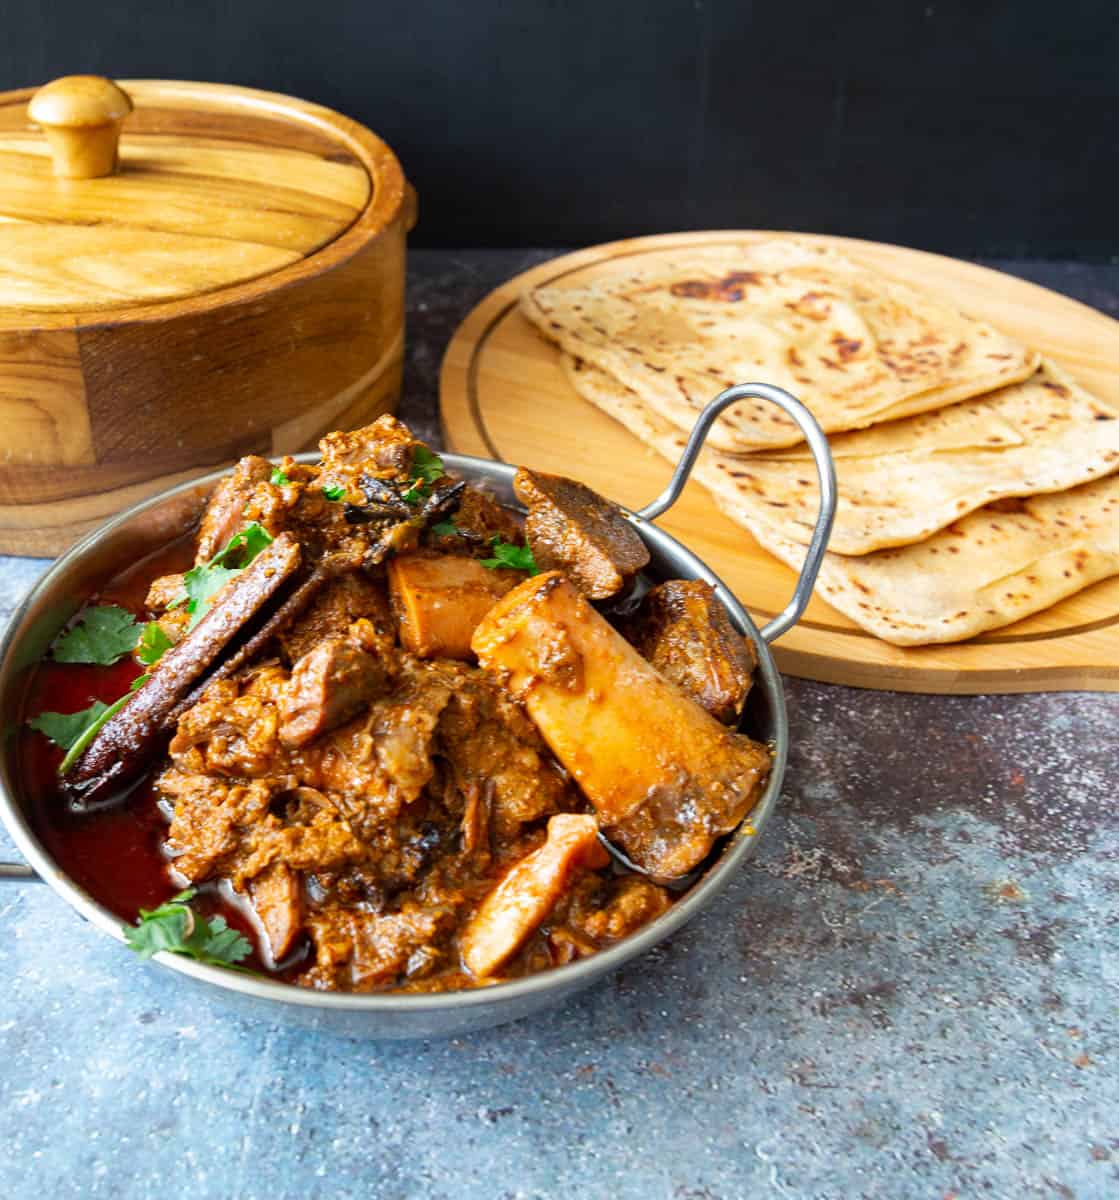 Lamb curry in a metal bowl next to chapatis on a wooden tray.